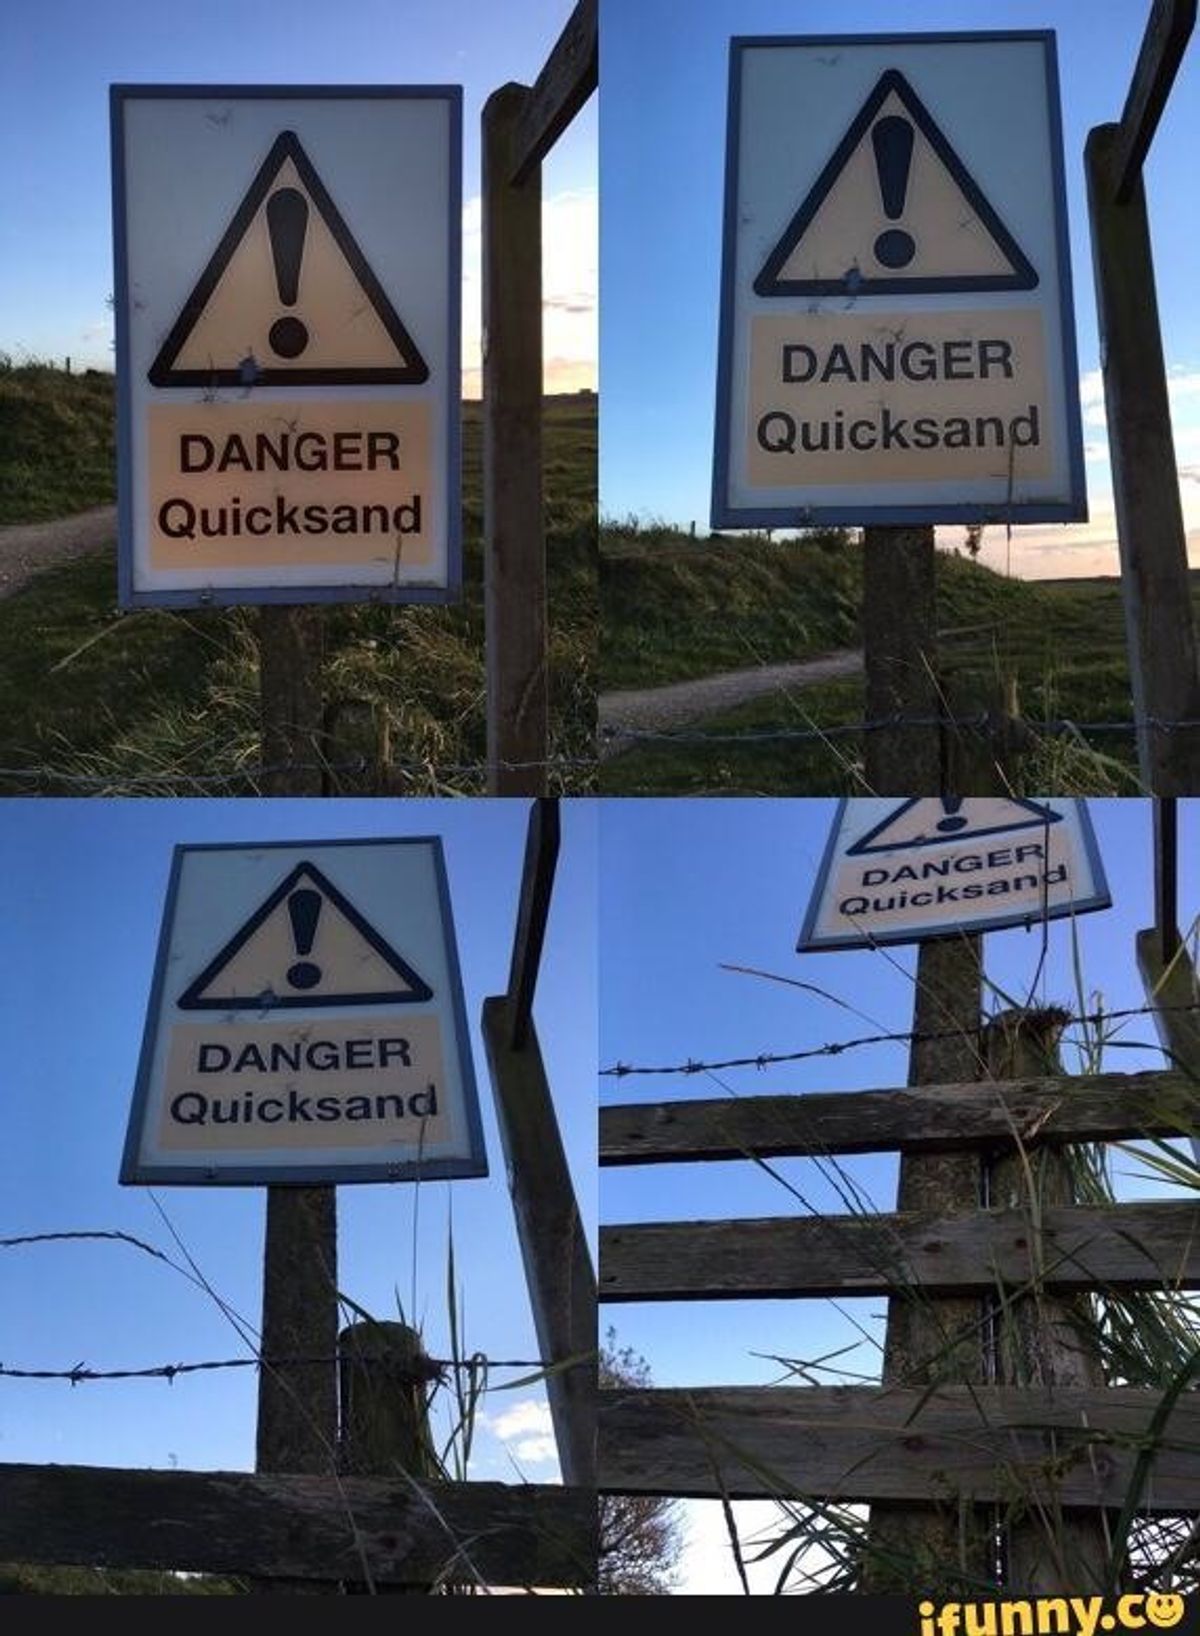 Posts with a danger quicksand sign.